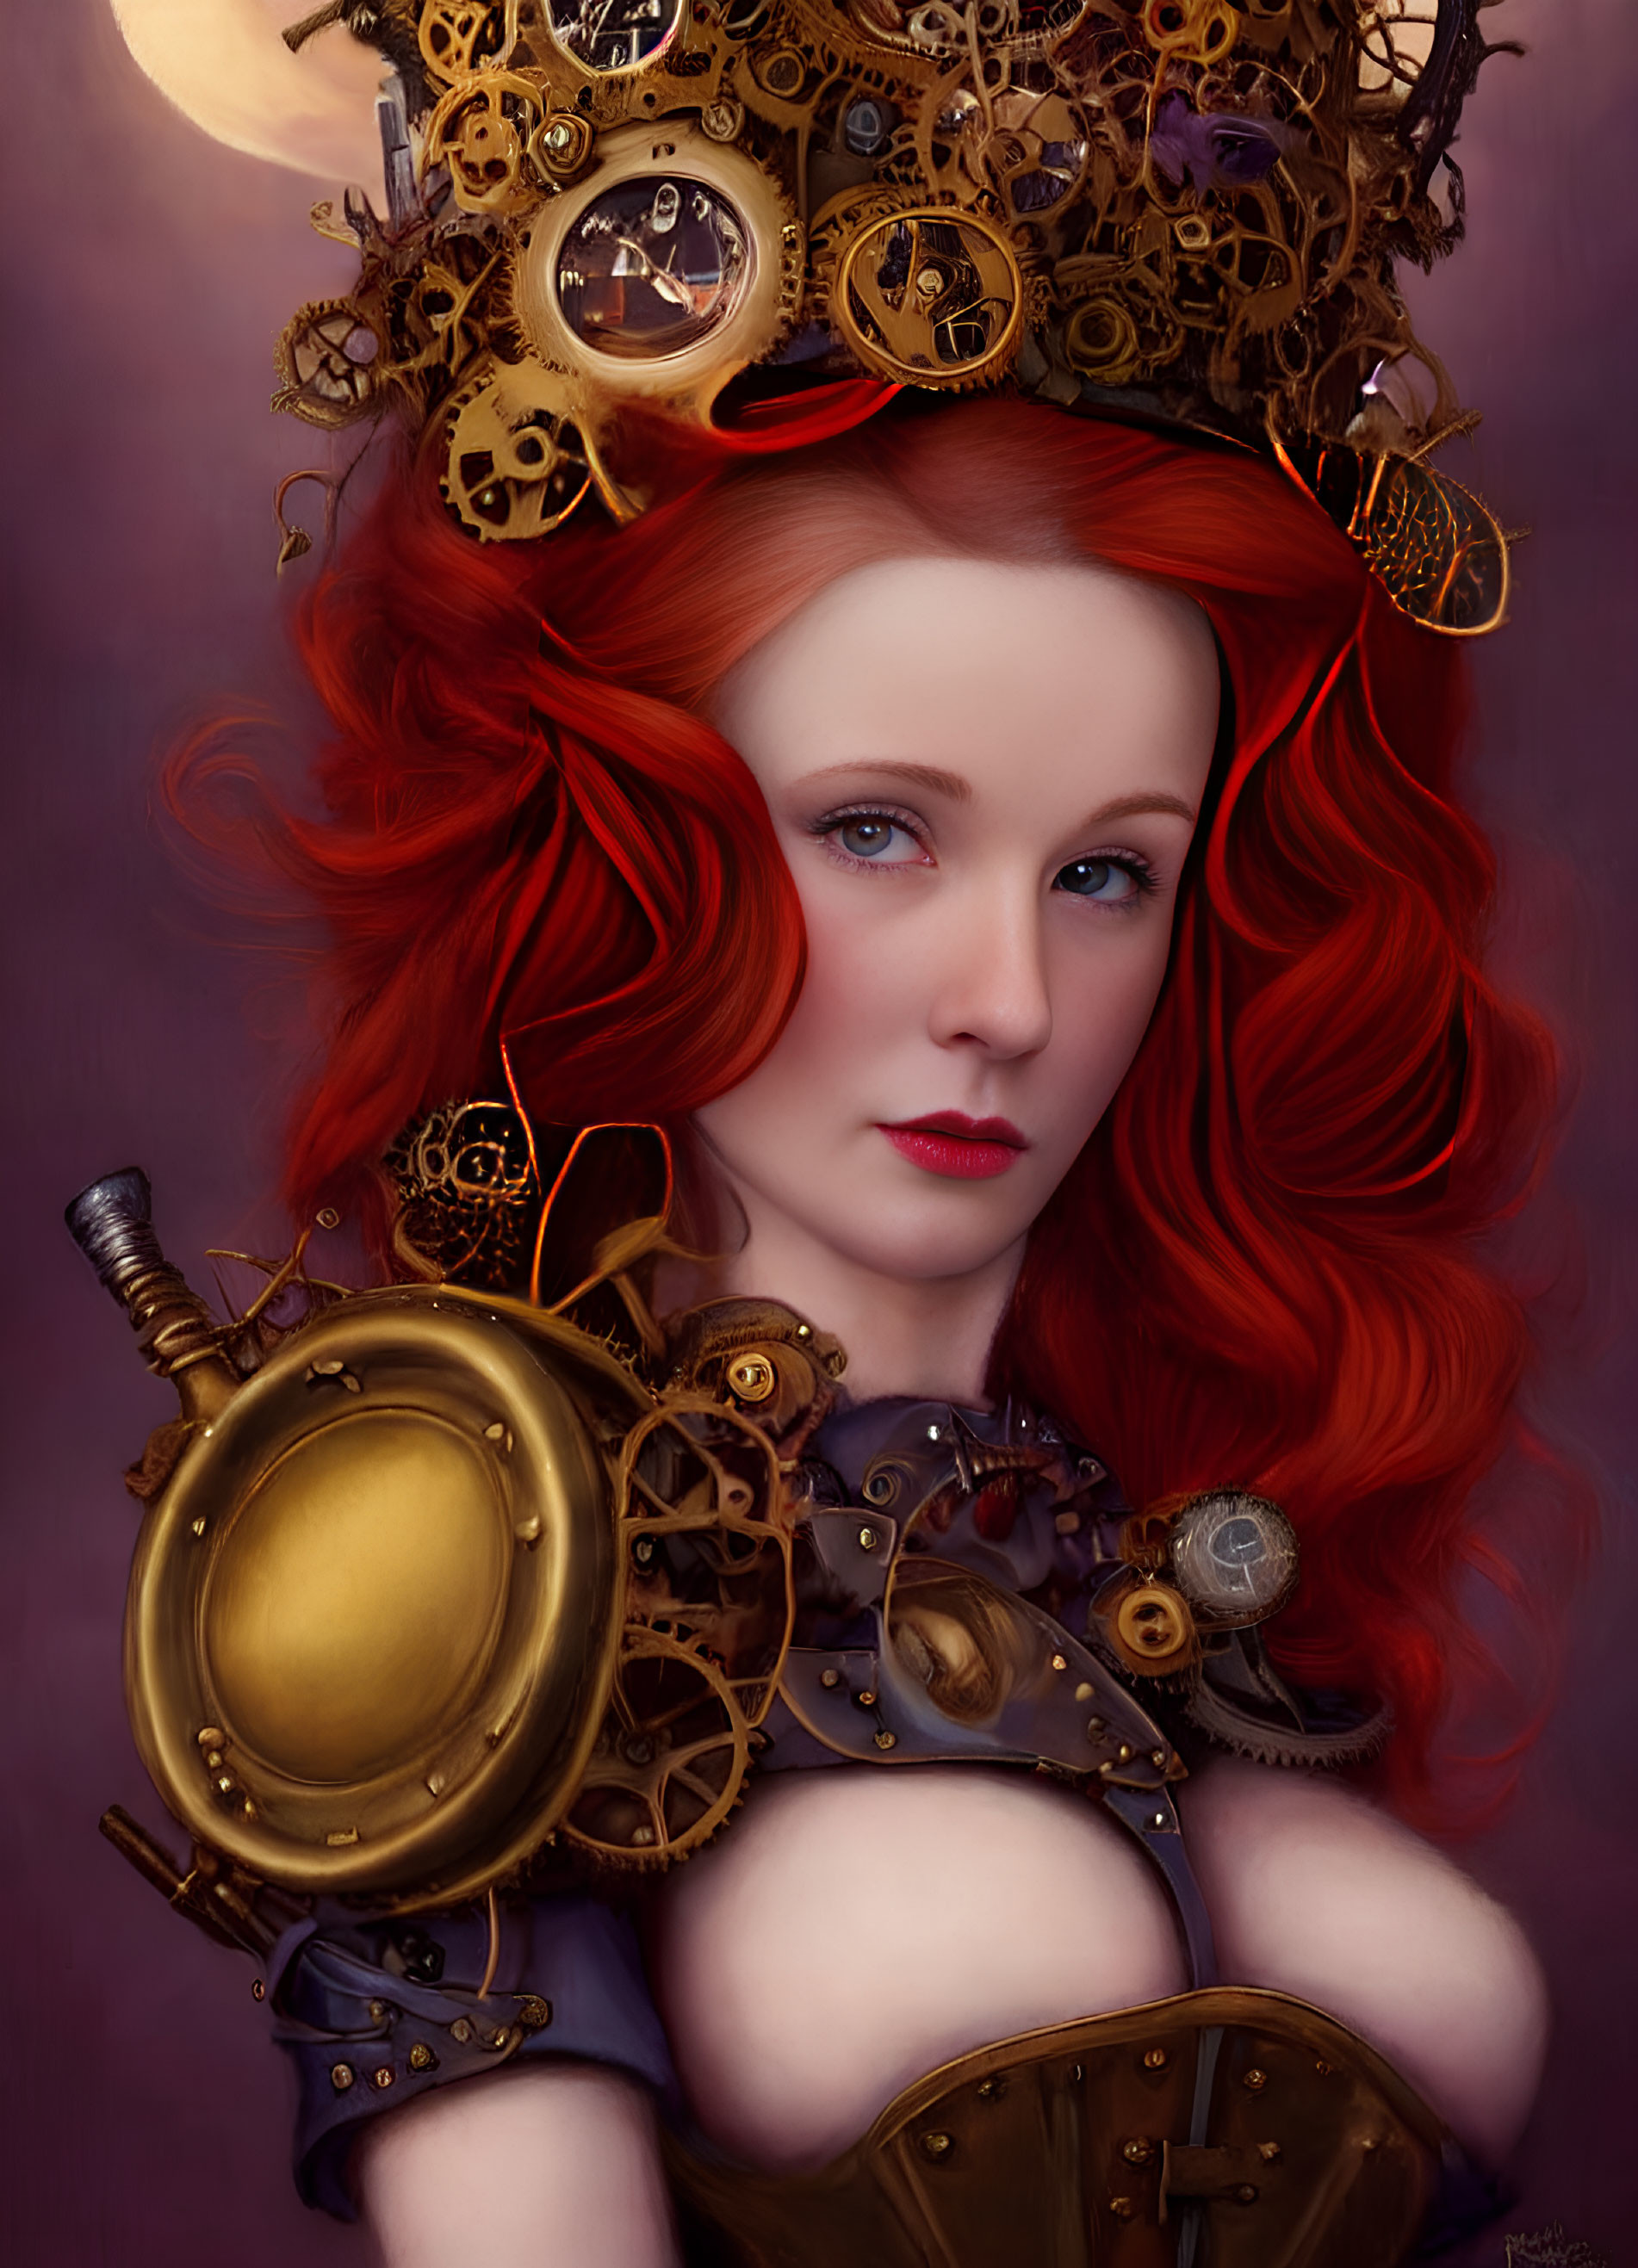 Vibrant red-haired woman in steampunk headdress on maroon backdrop